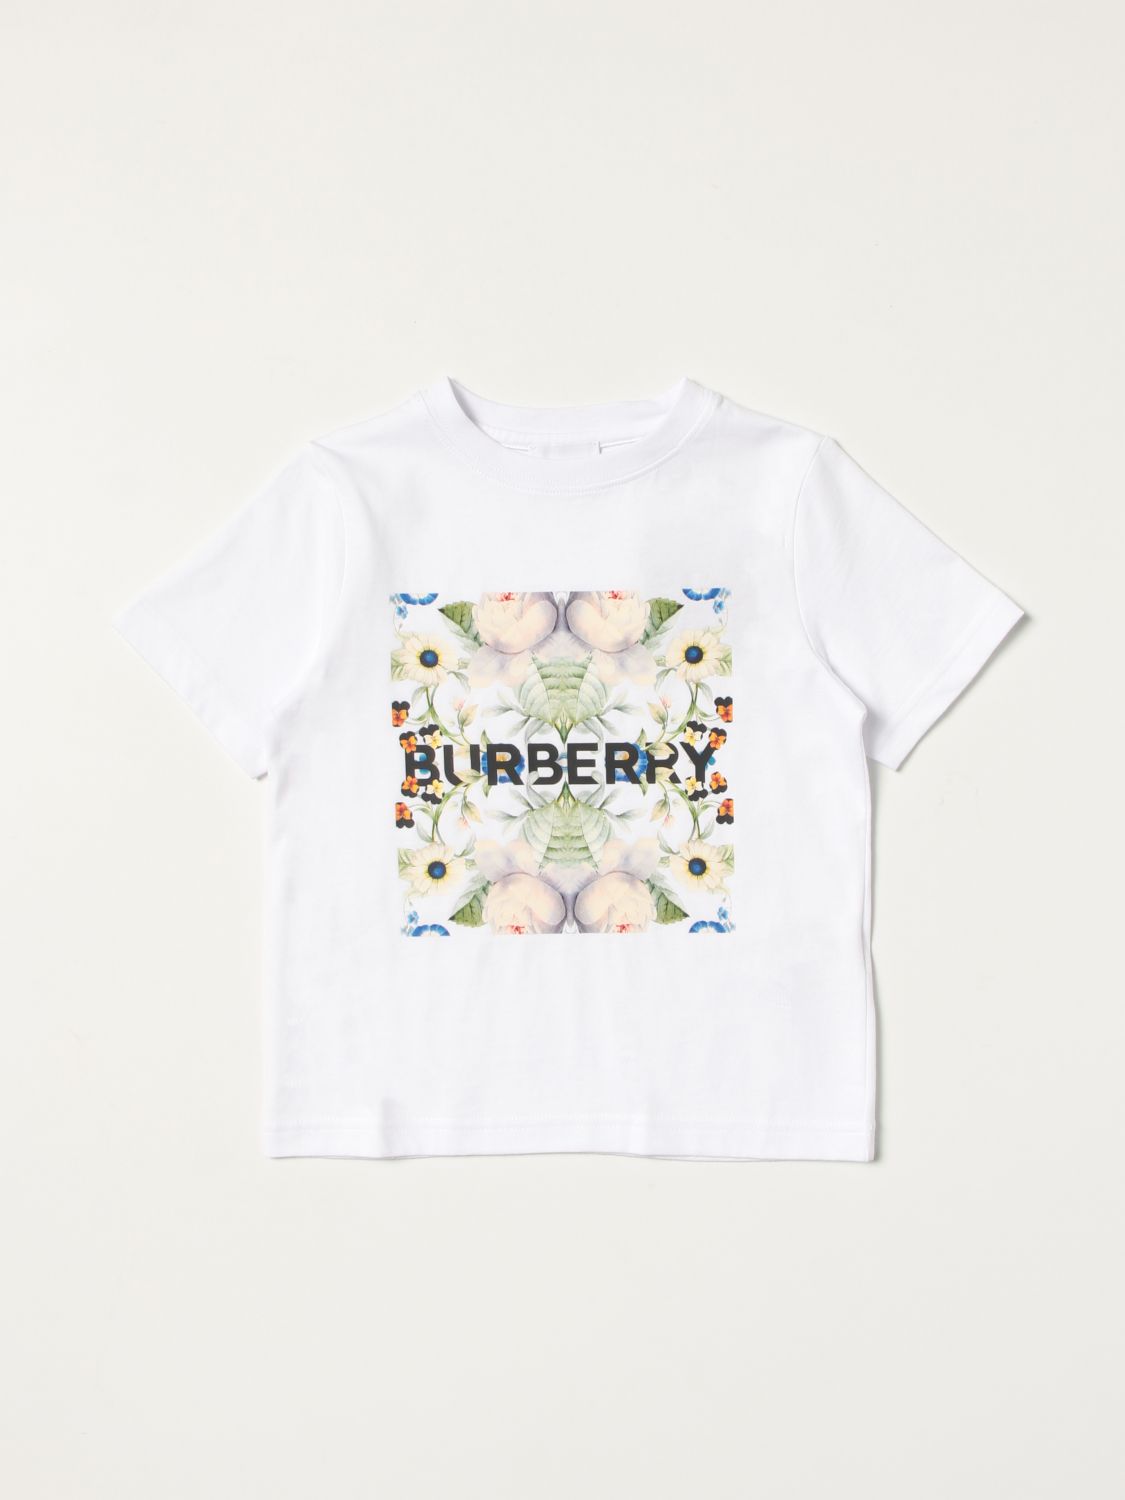 Burberry Outlet: Dutch t-shirt with collage printT-shirt kids - White |  Burberry t-shirt 8048607 online on 